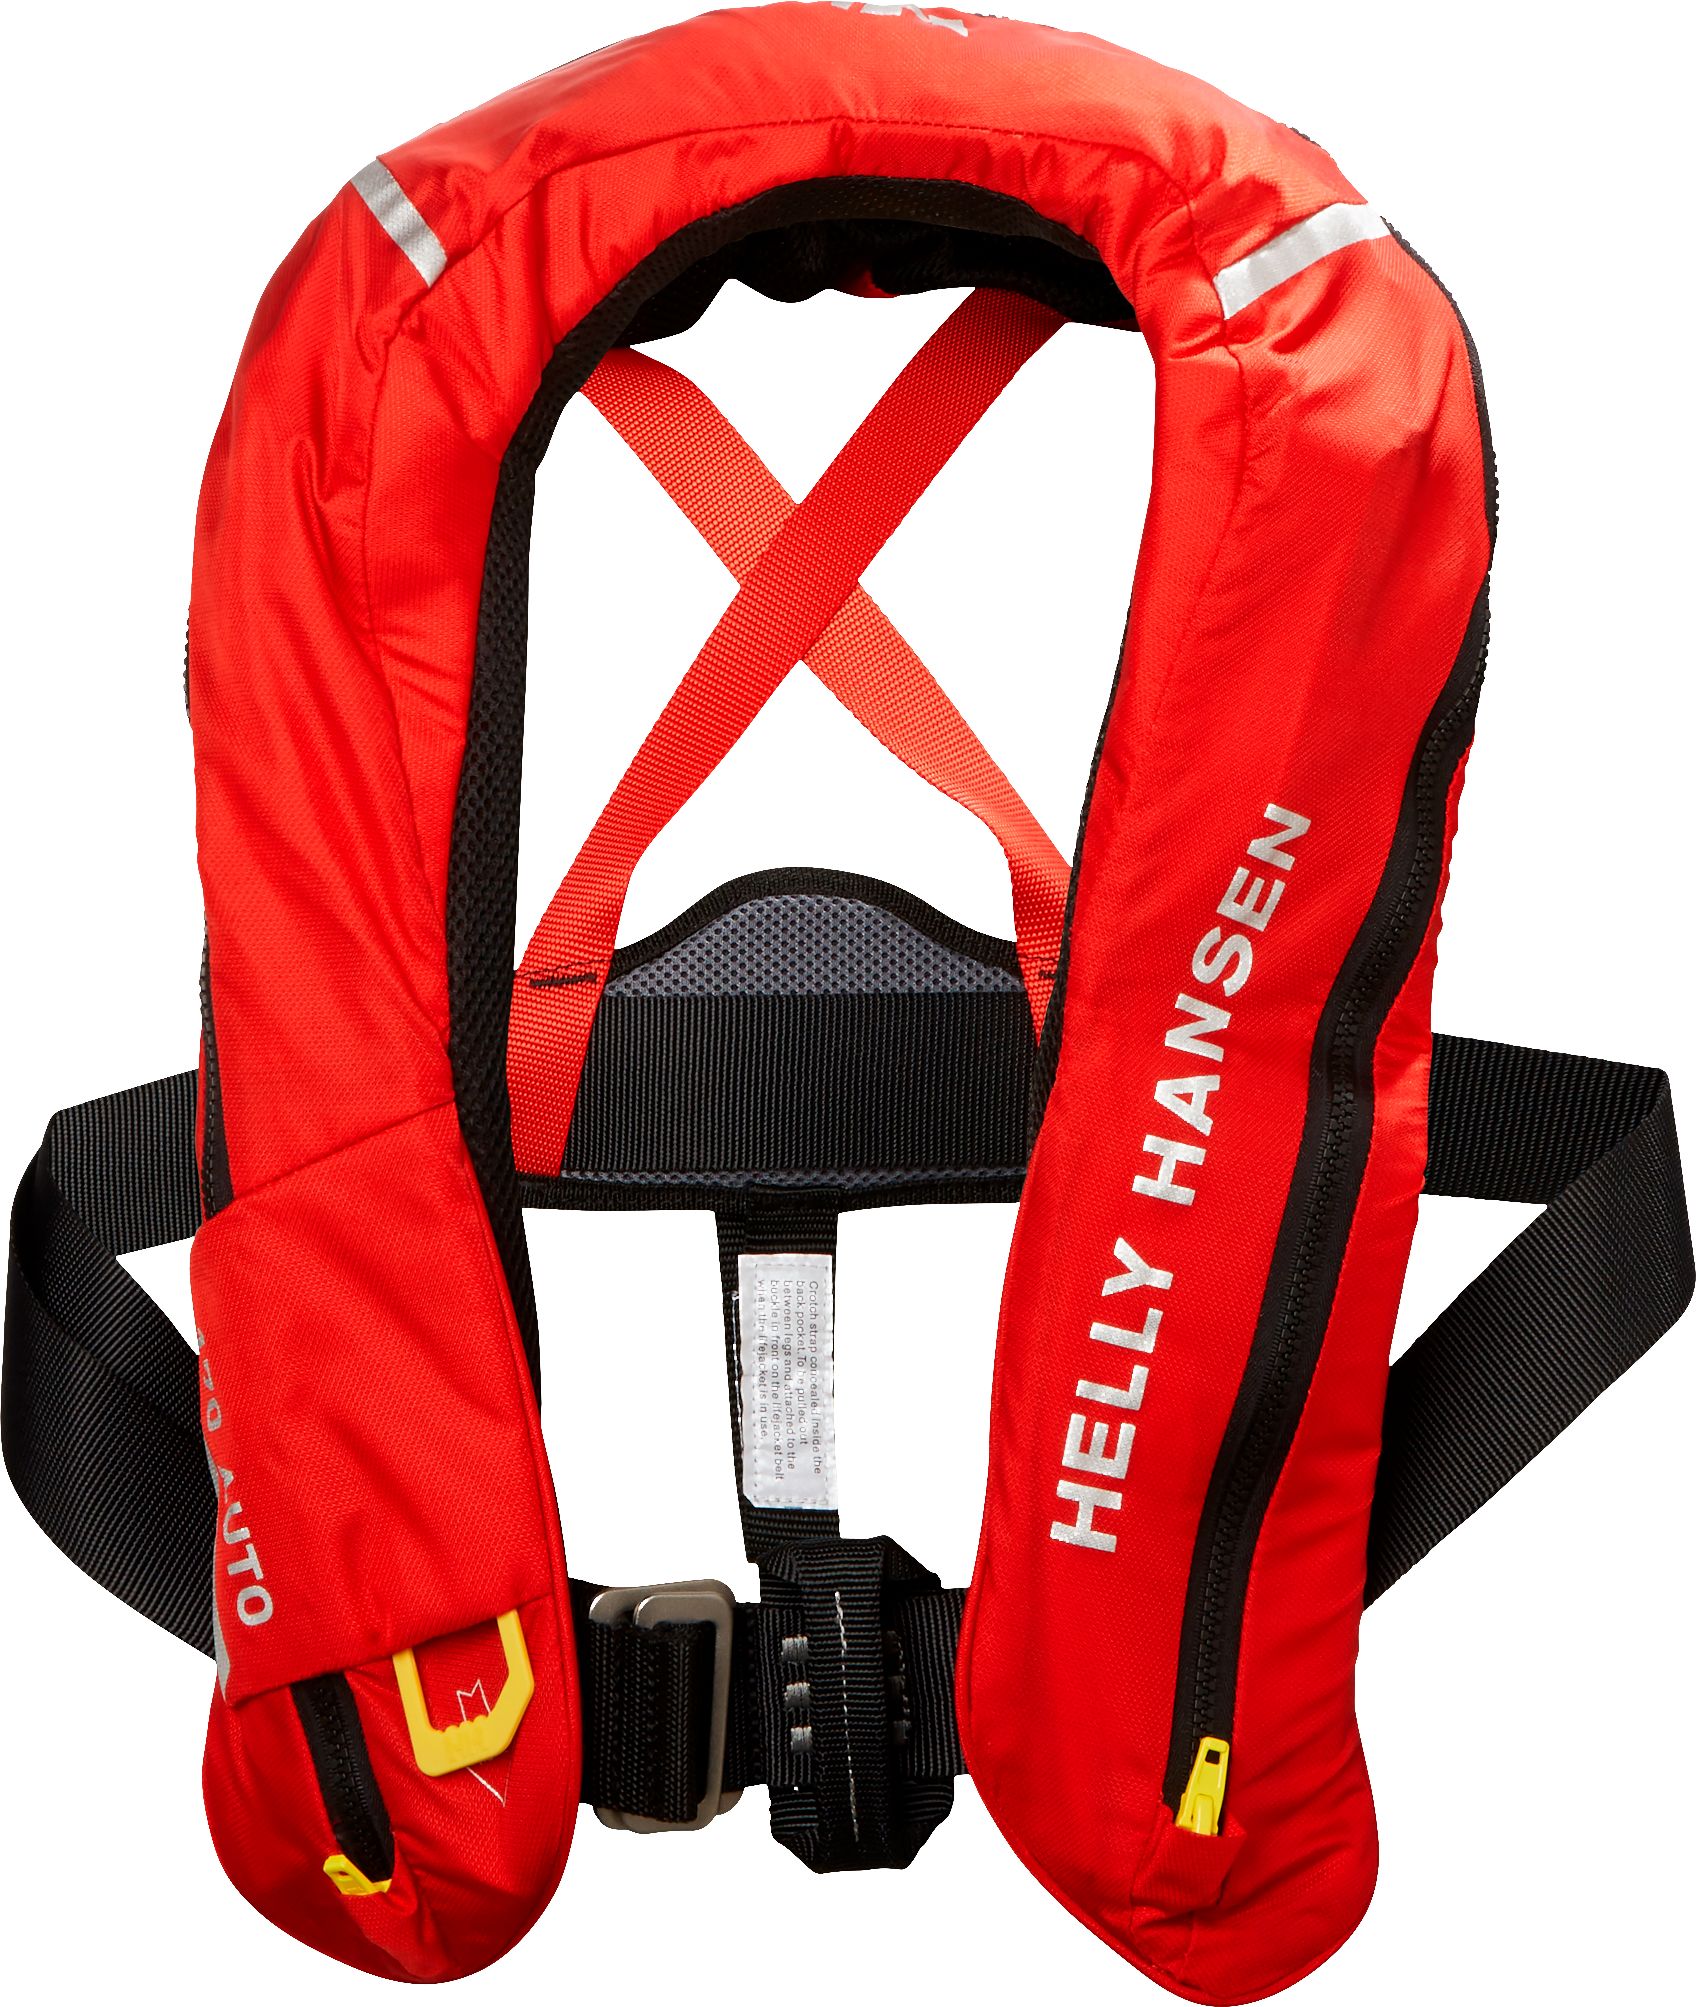 HELLY HANSEN, SAILSAFE INFLATABLE INSHORE